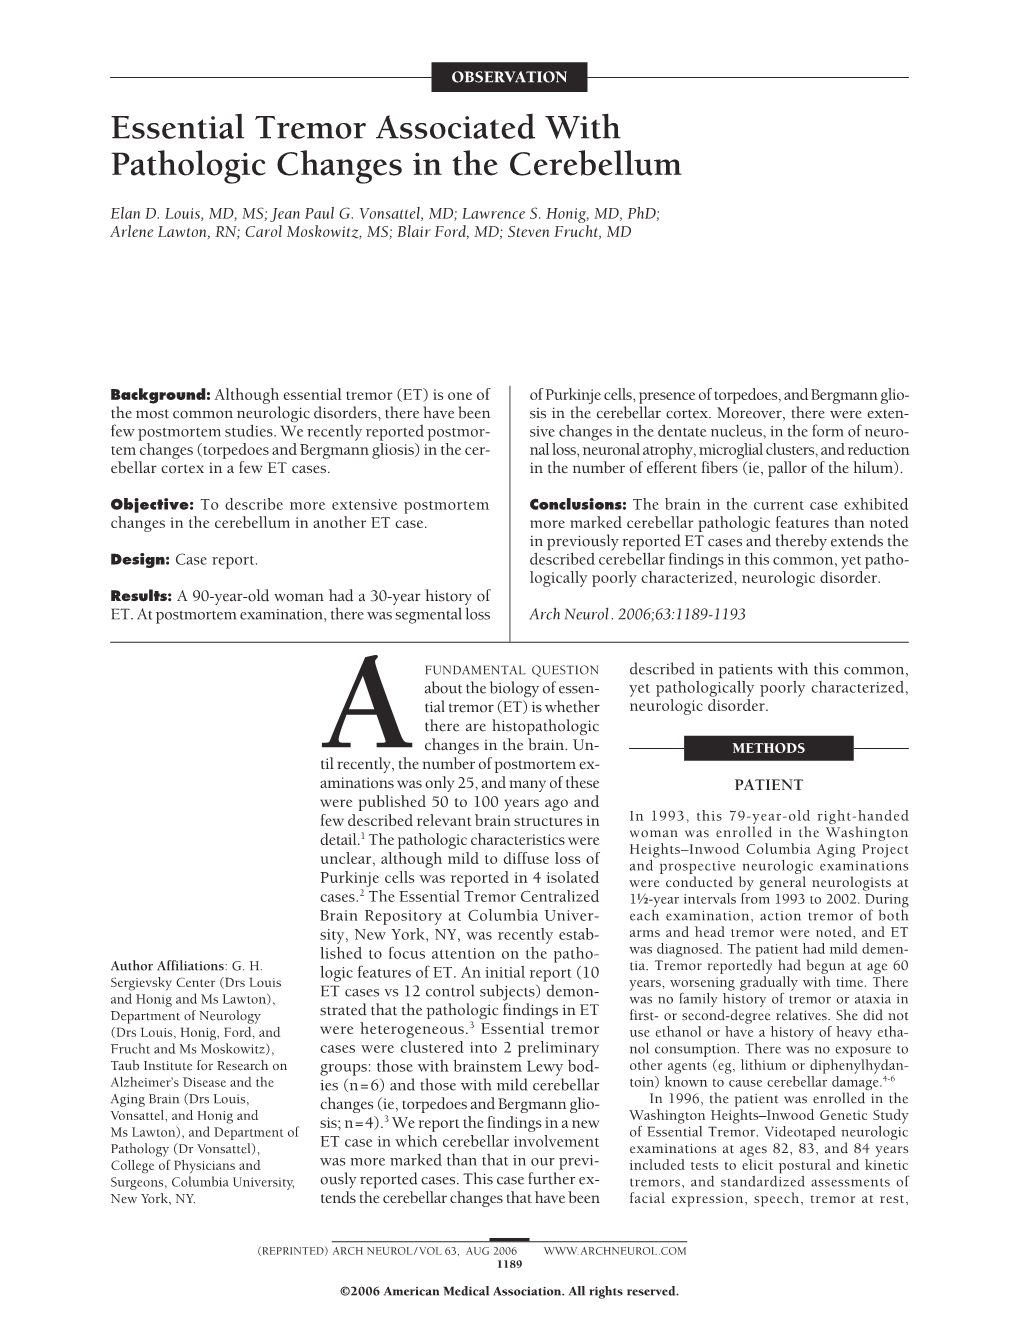 Essential Tremor Associated with Pathologic Changes in the Cerebellum